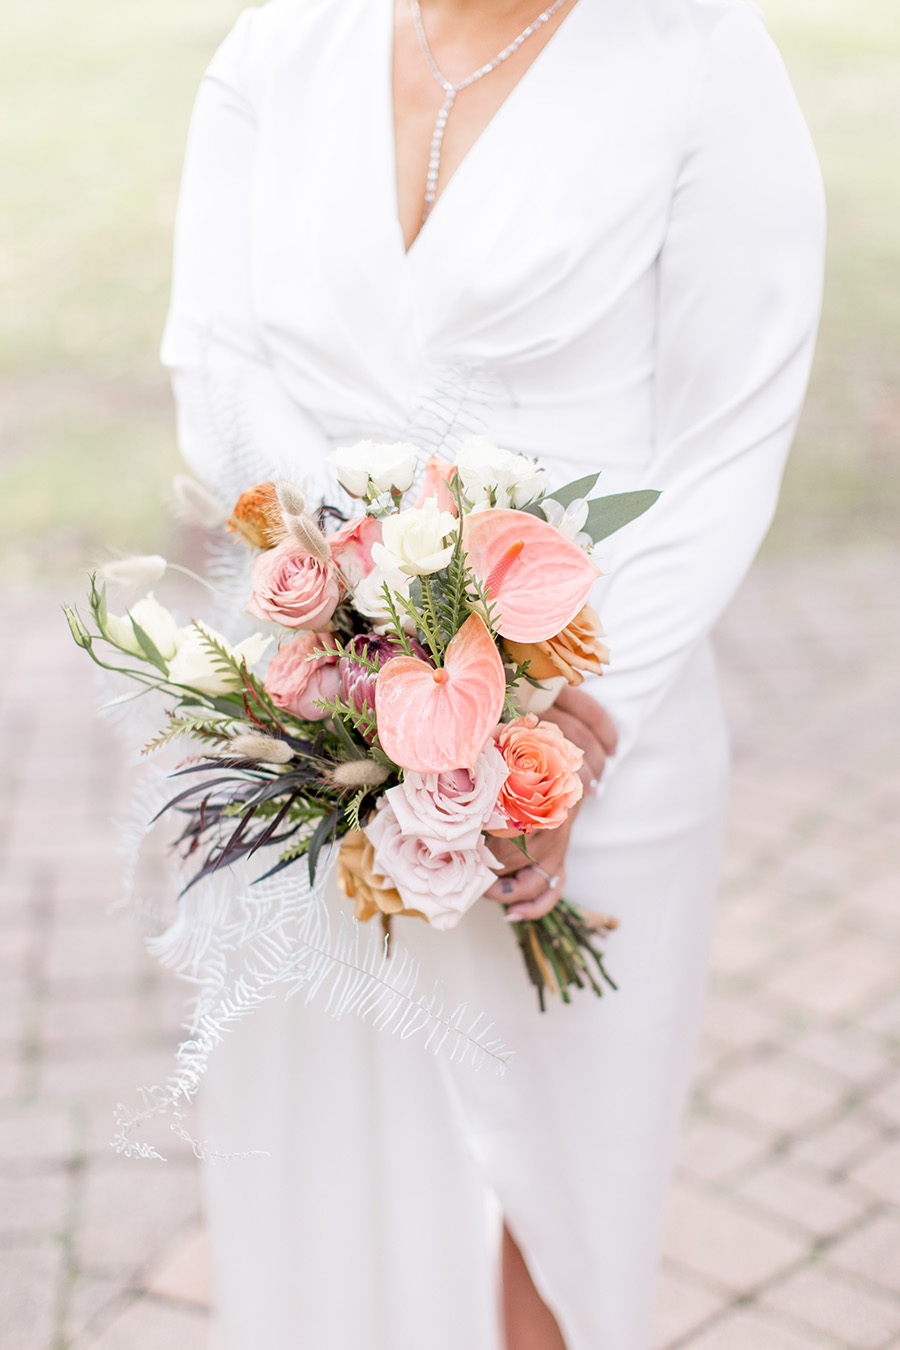 Fall wedding bouquet with protea and calla lilies